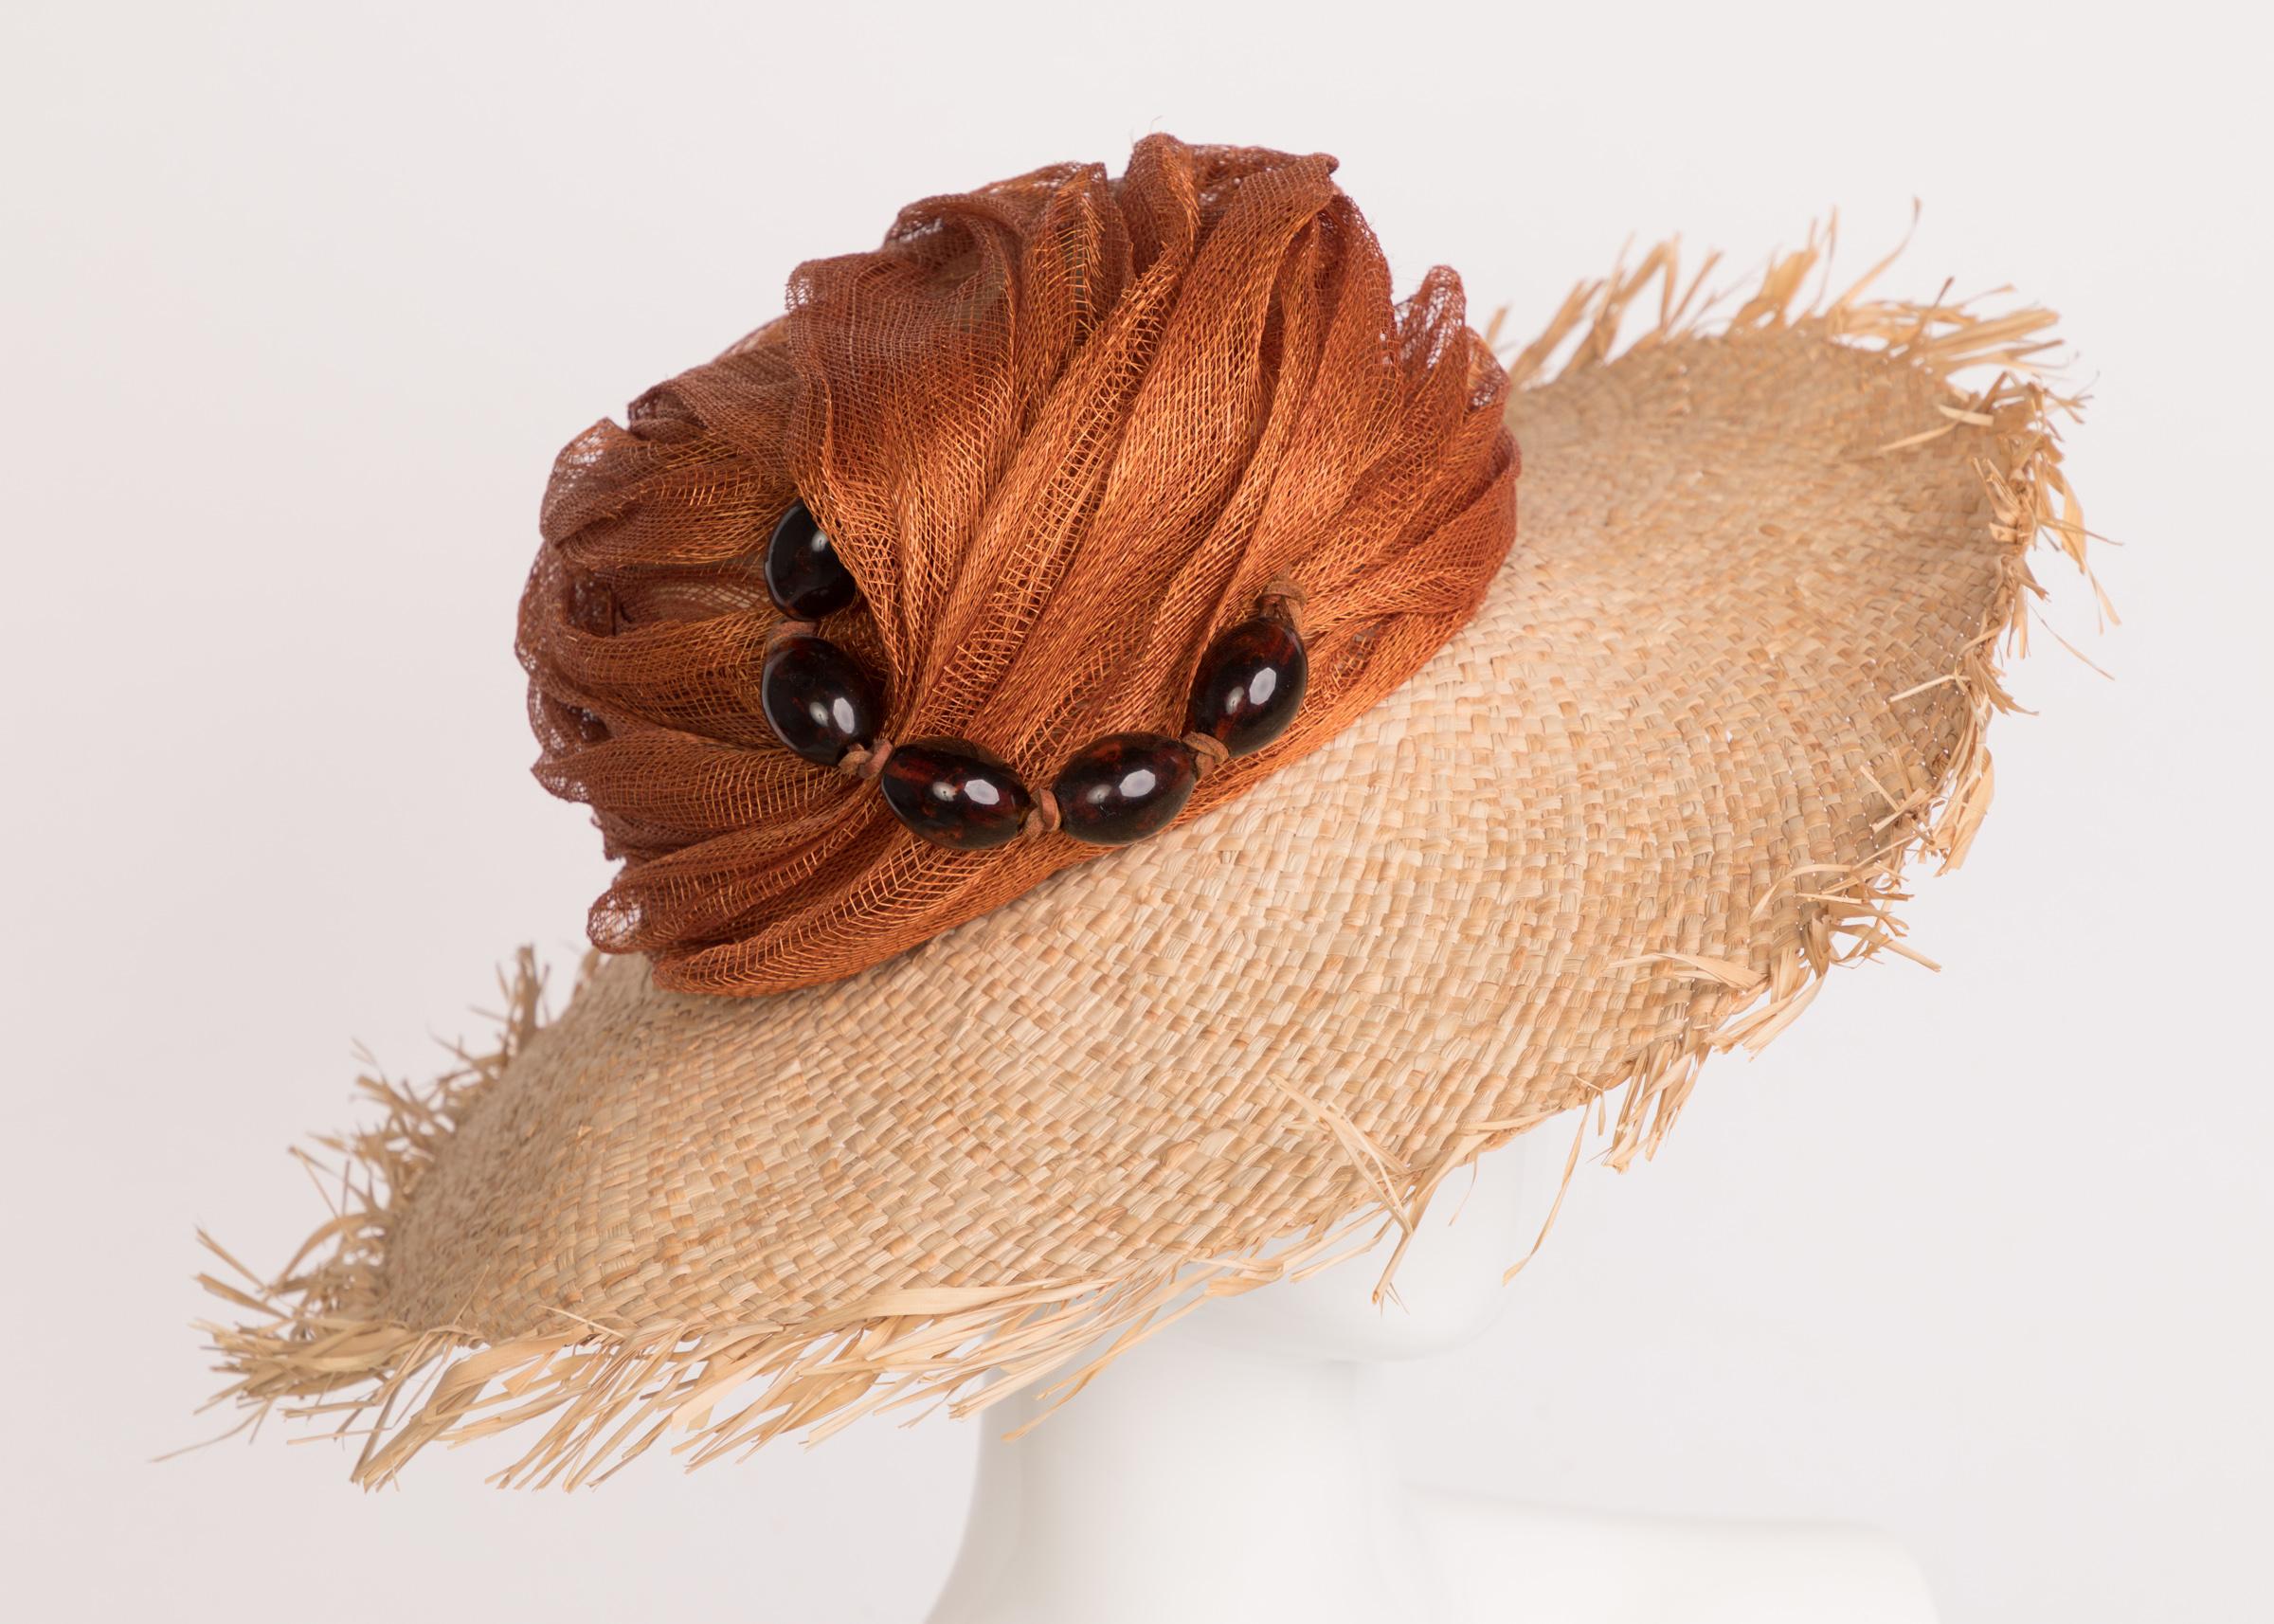 Light and refreshing, a well-coordinated accessory is the finishing touches to any great look. Made from a light tan raffia, this hat wonderfully merges a variety of textures with a well-balance monochromatic harmony. The crown of the hat is wrapped